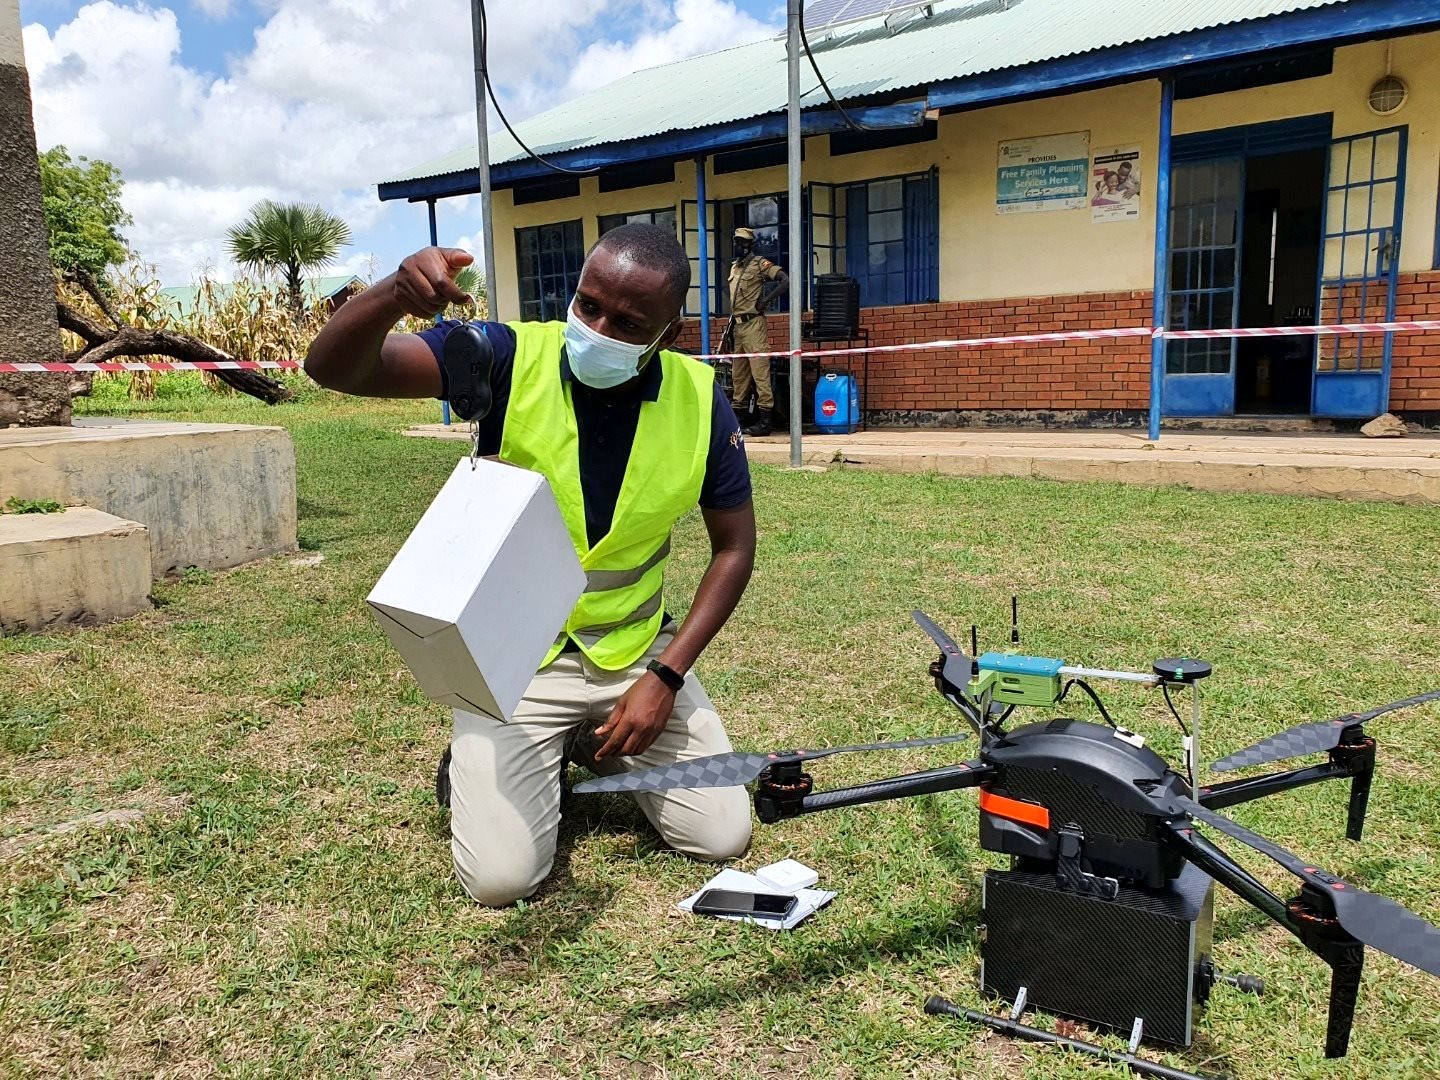 An IDI staff demonstrates how the medical drones will work. Photo credit: UNCDF